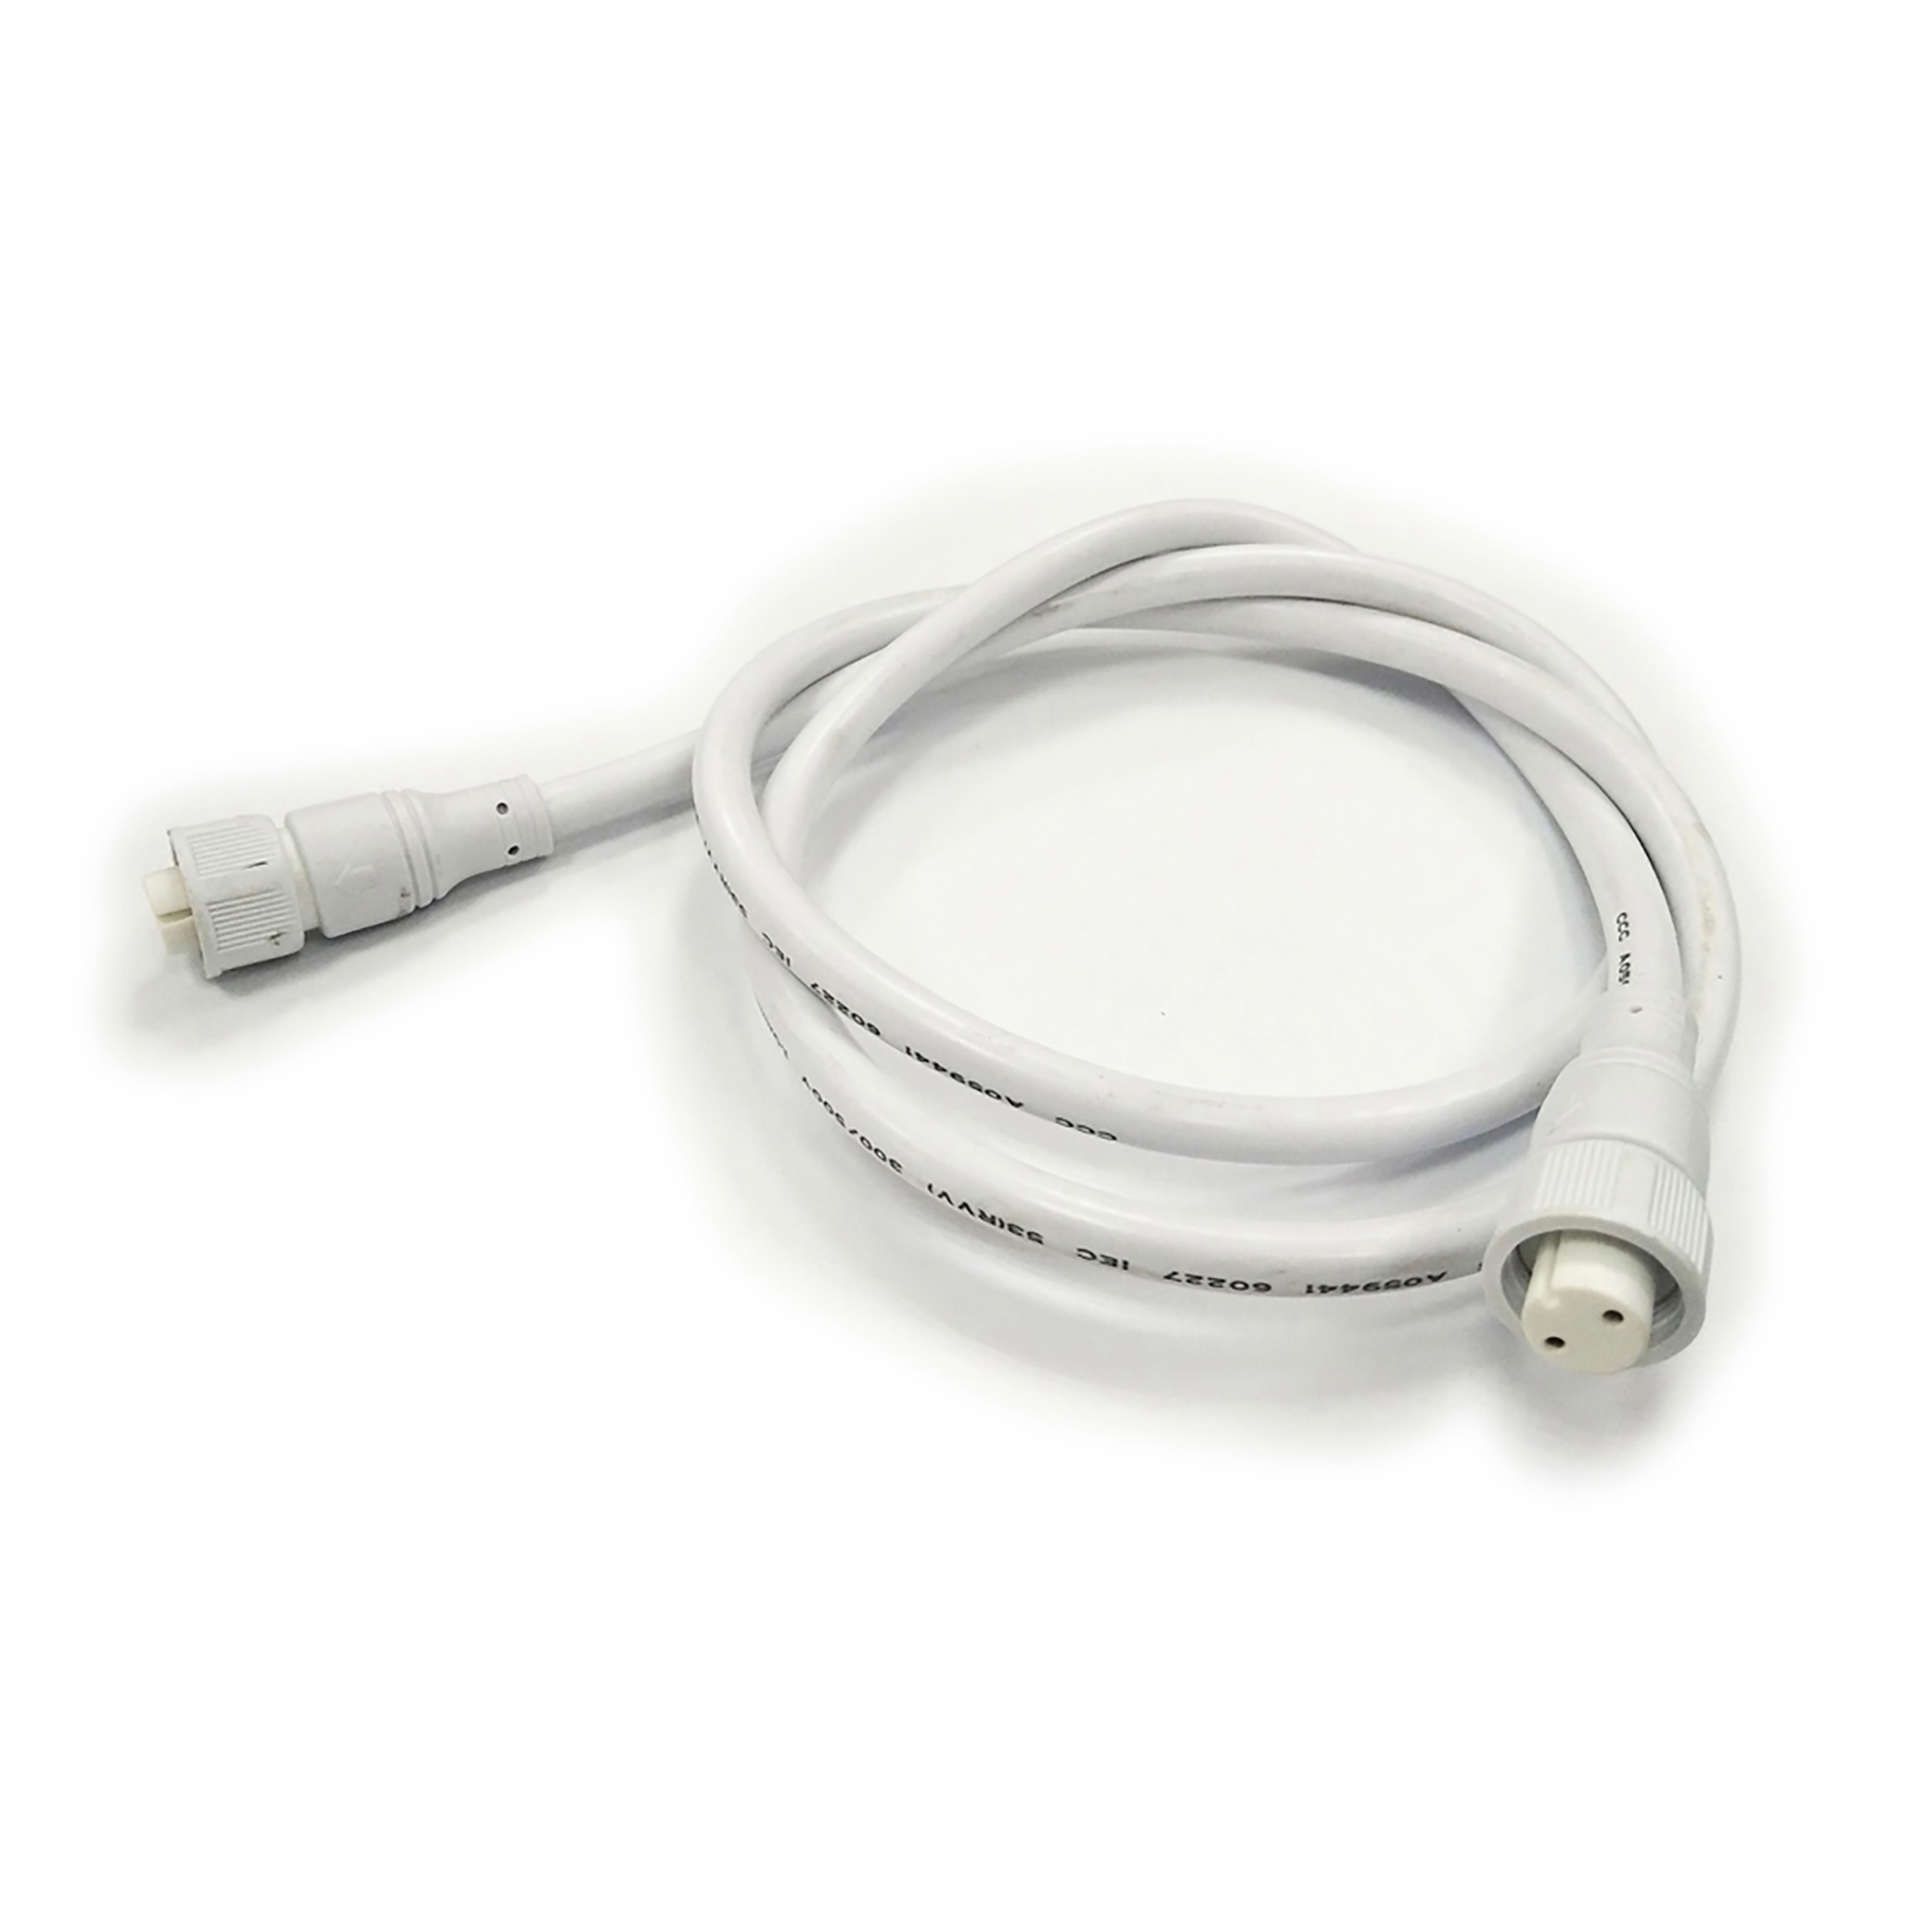 DA640001/WH  Indi 1m Connection Cable With Female Connectors; White IP65